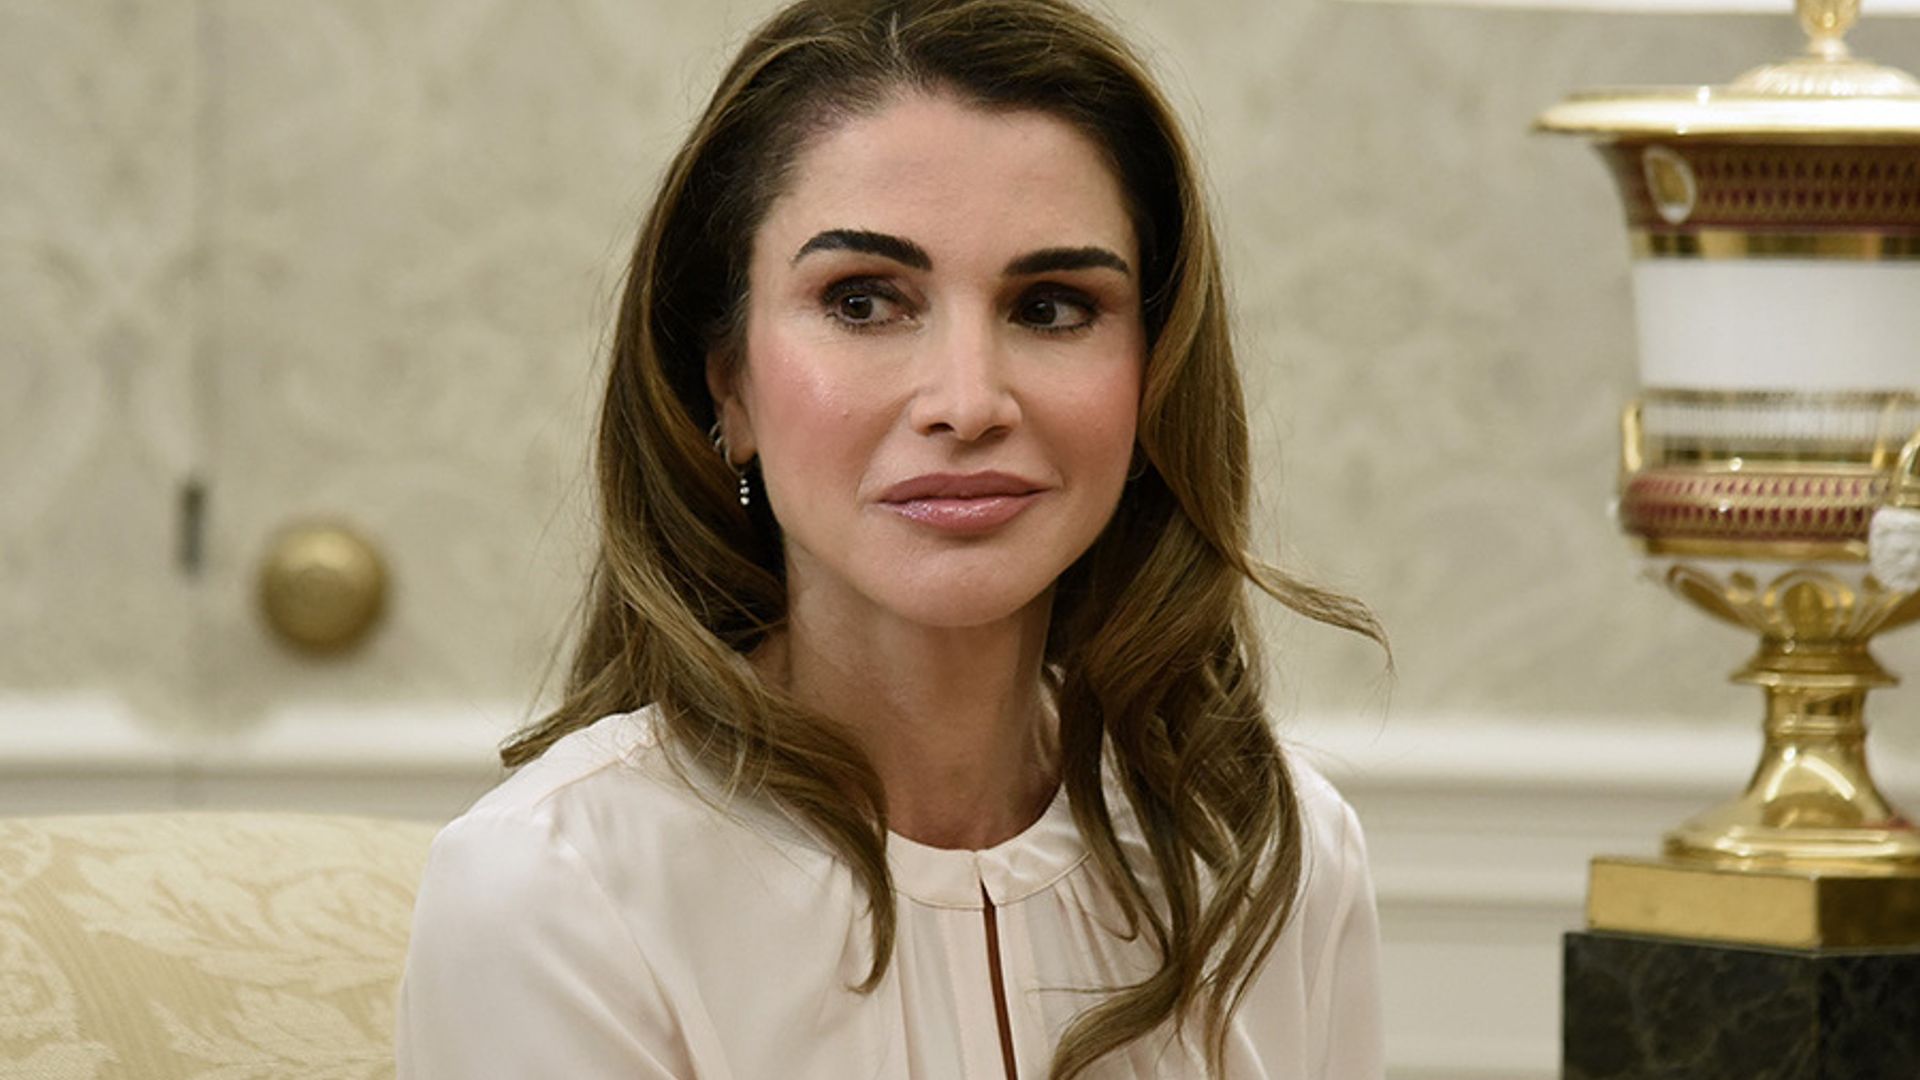 Queen Rania looks so stylish as she and King Abdullah visit the U.S. with Crown Prince Hussein